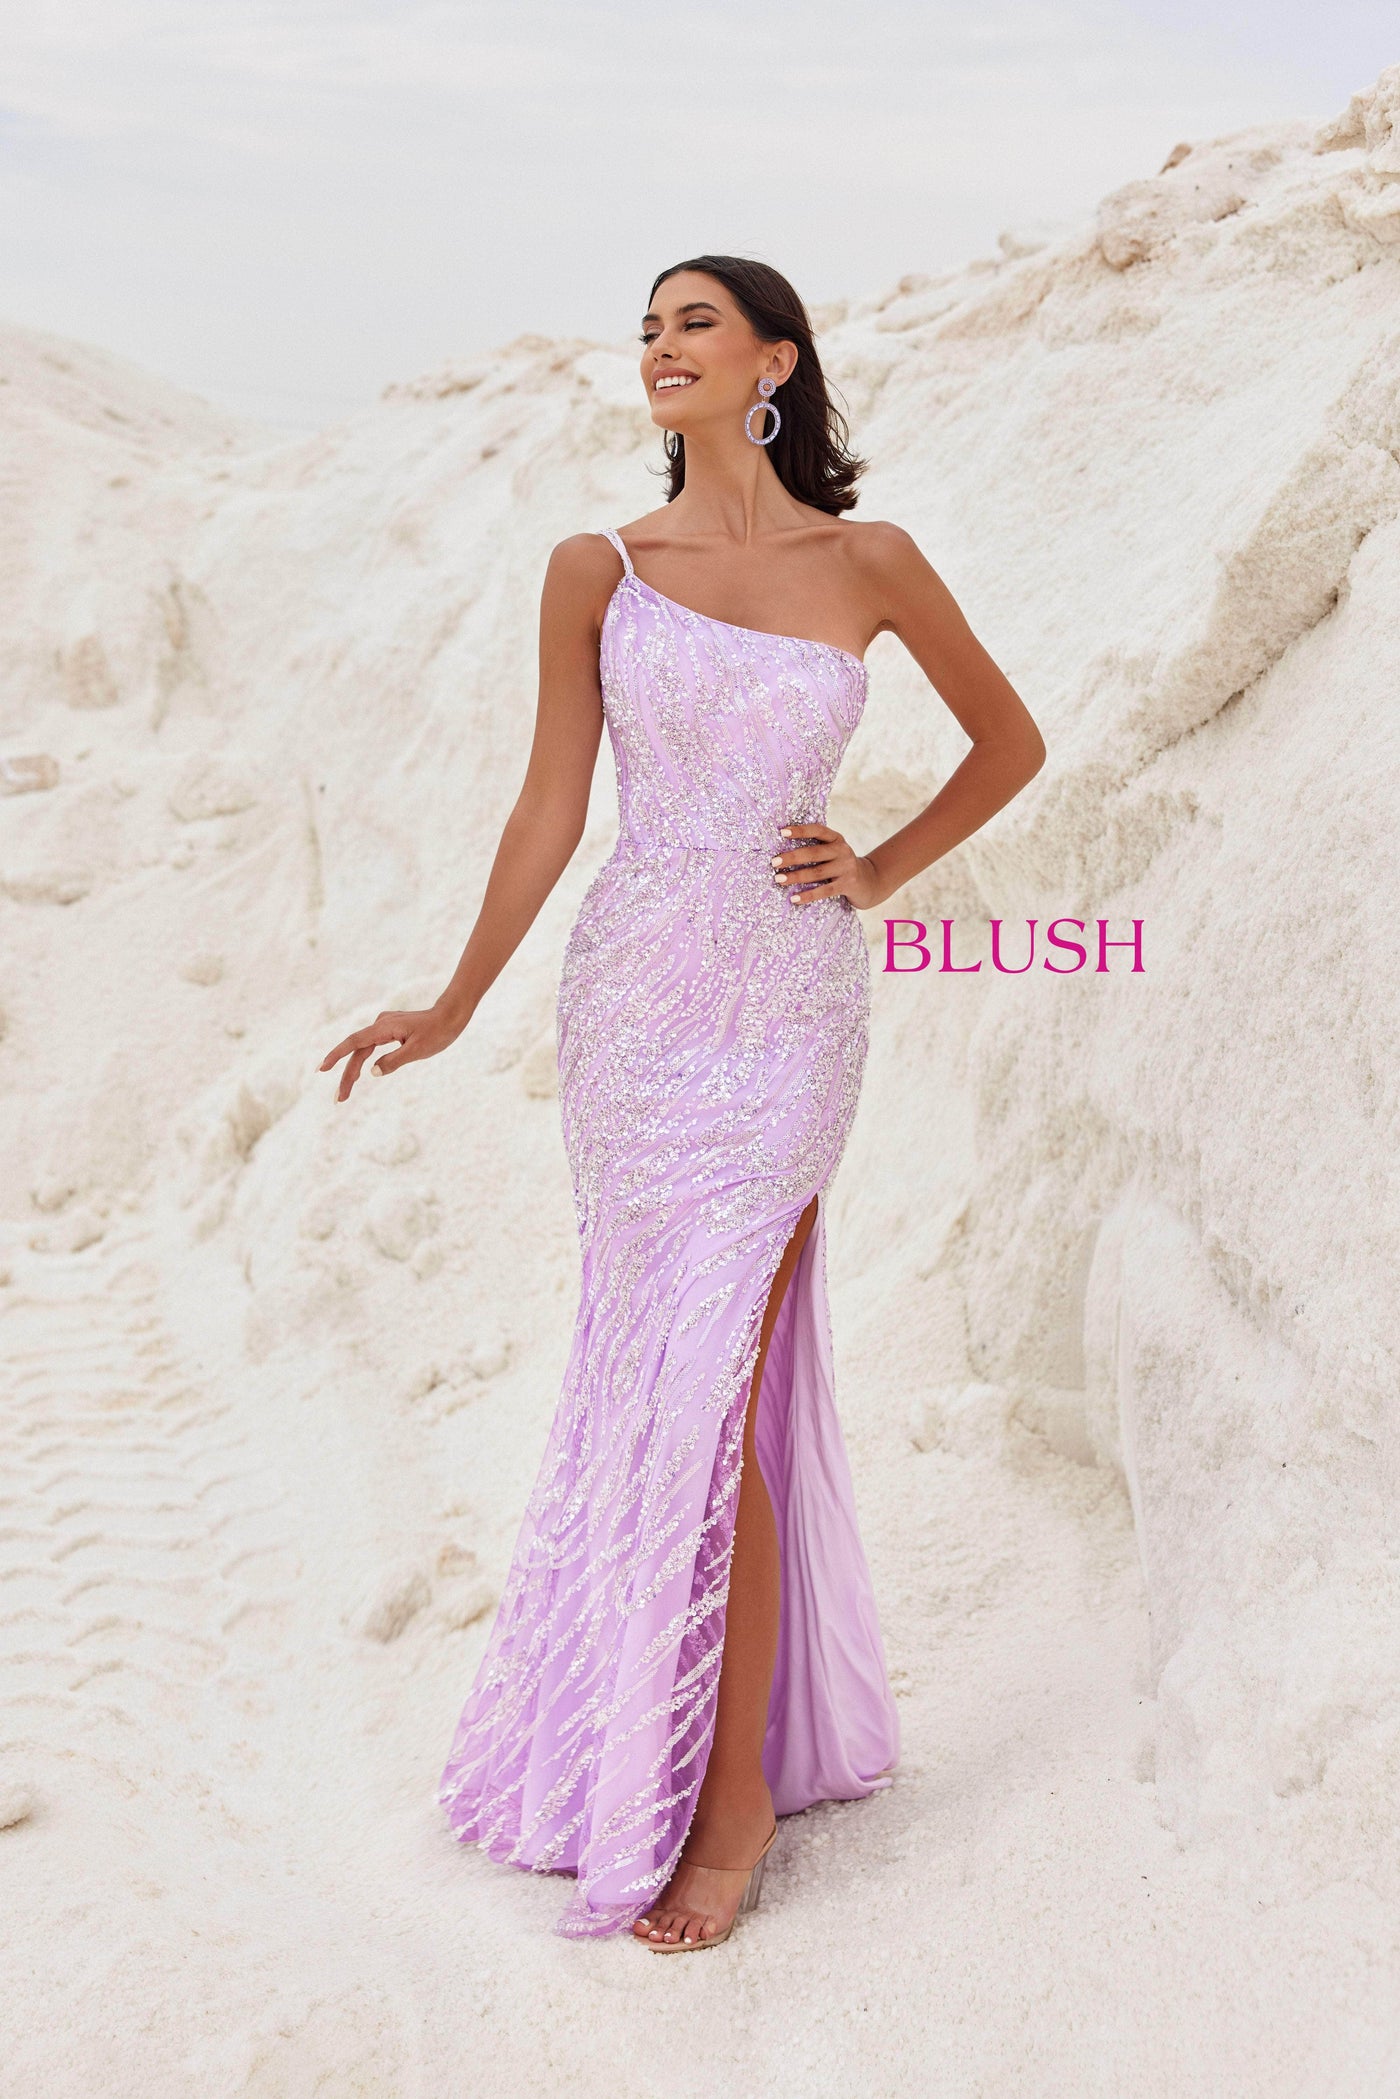 Blush by Alexia Designs 12121 - Dual Strap Embellished Prom GownSpecial Occasion Dress